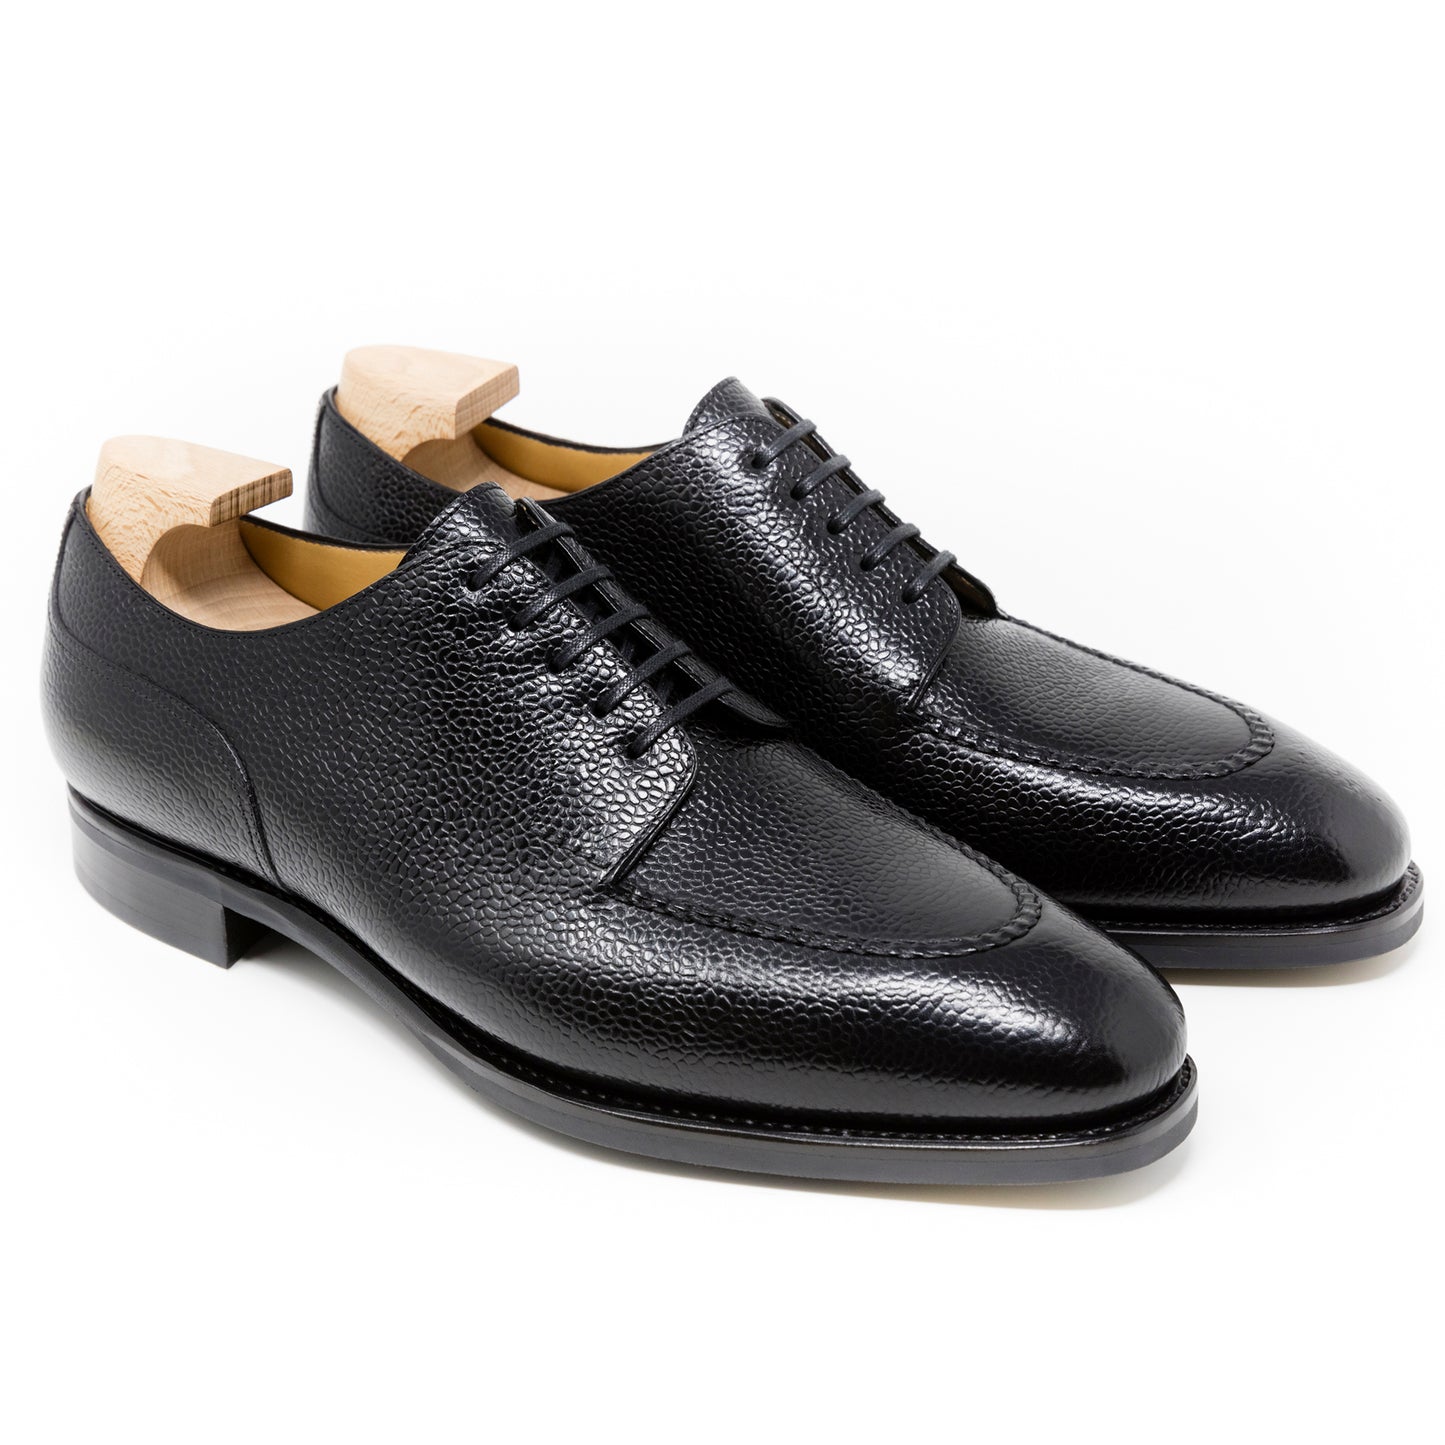 TLB Mallorca leather shoes 135 / VELAZQUEZ / COUNTRY CALF BLACK